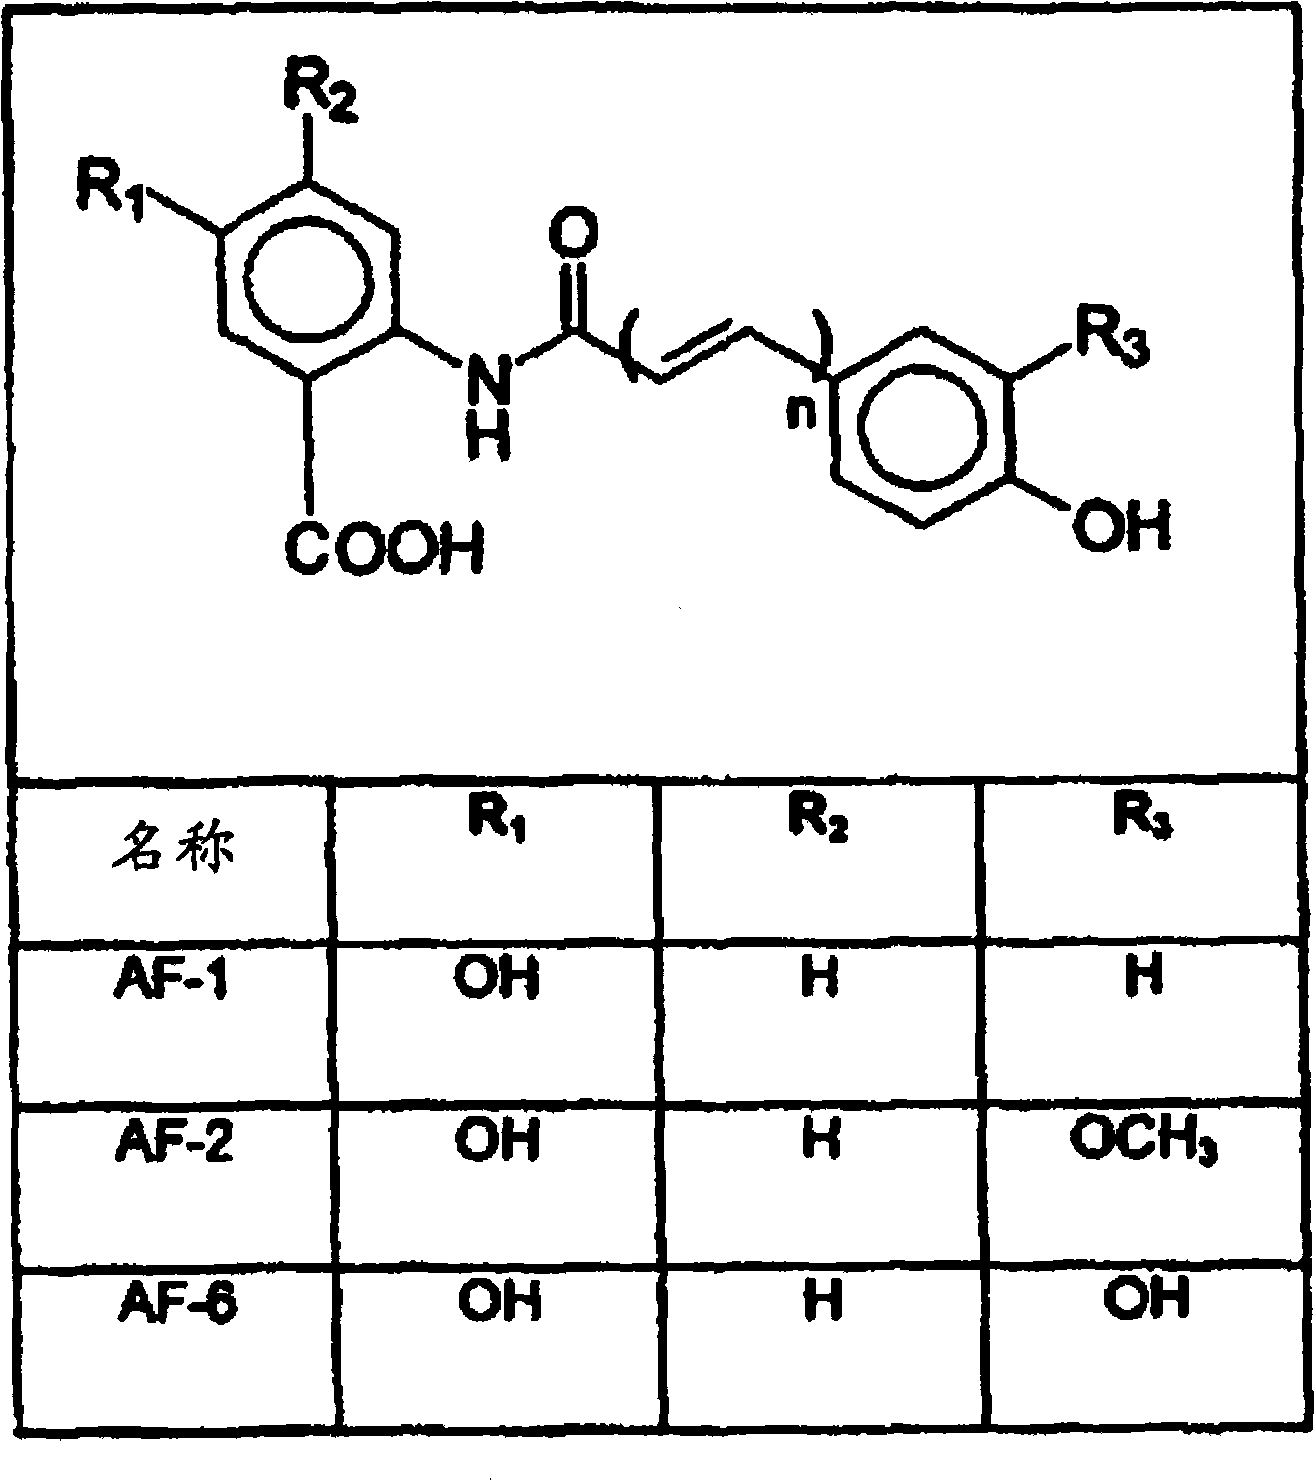 Avenanthramide-containing compositions